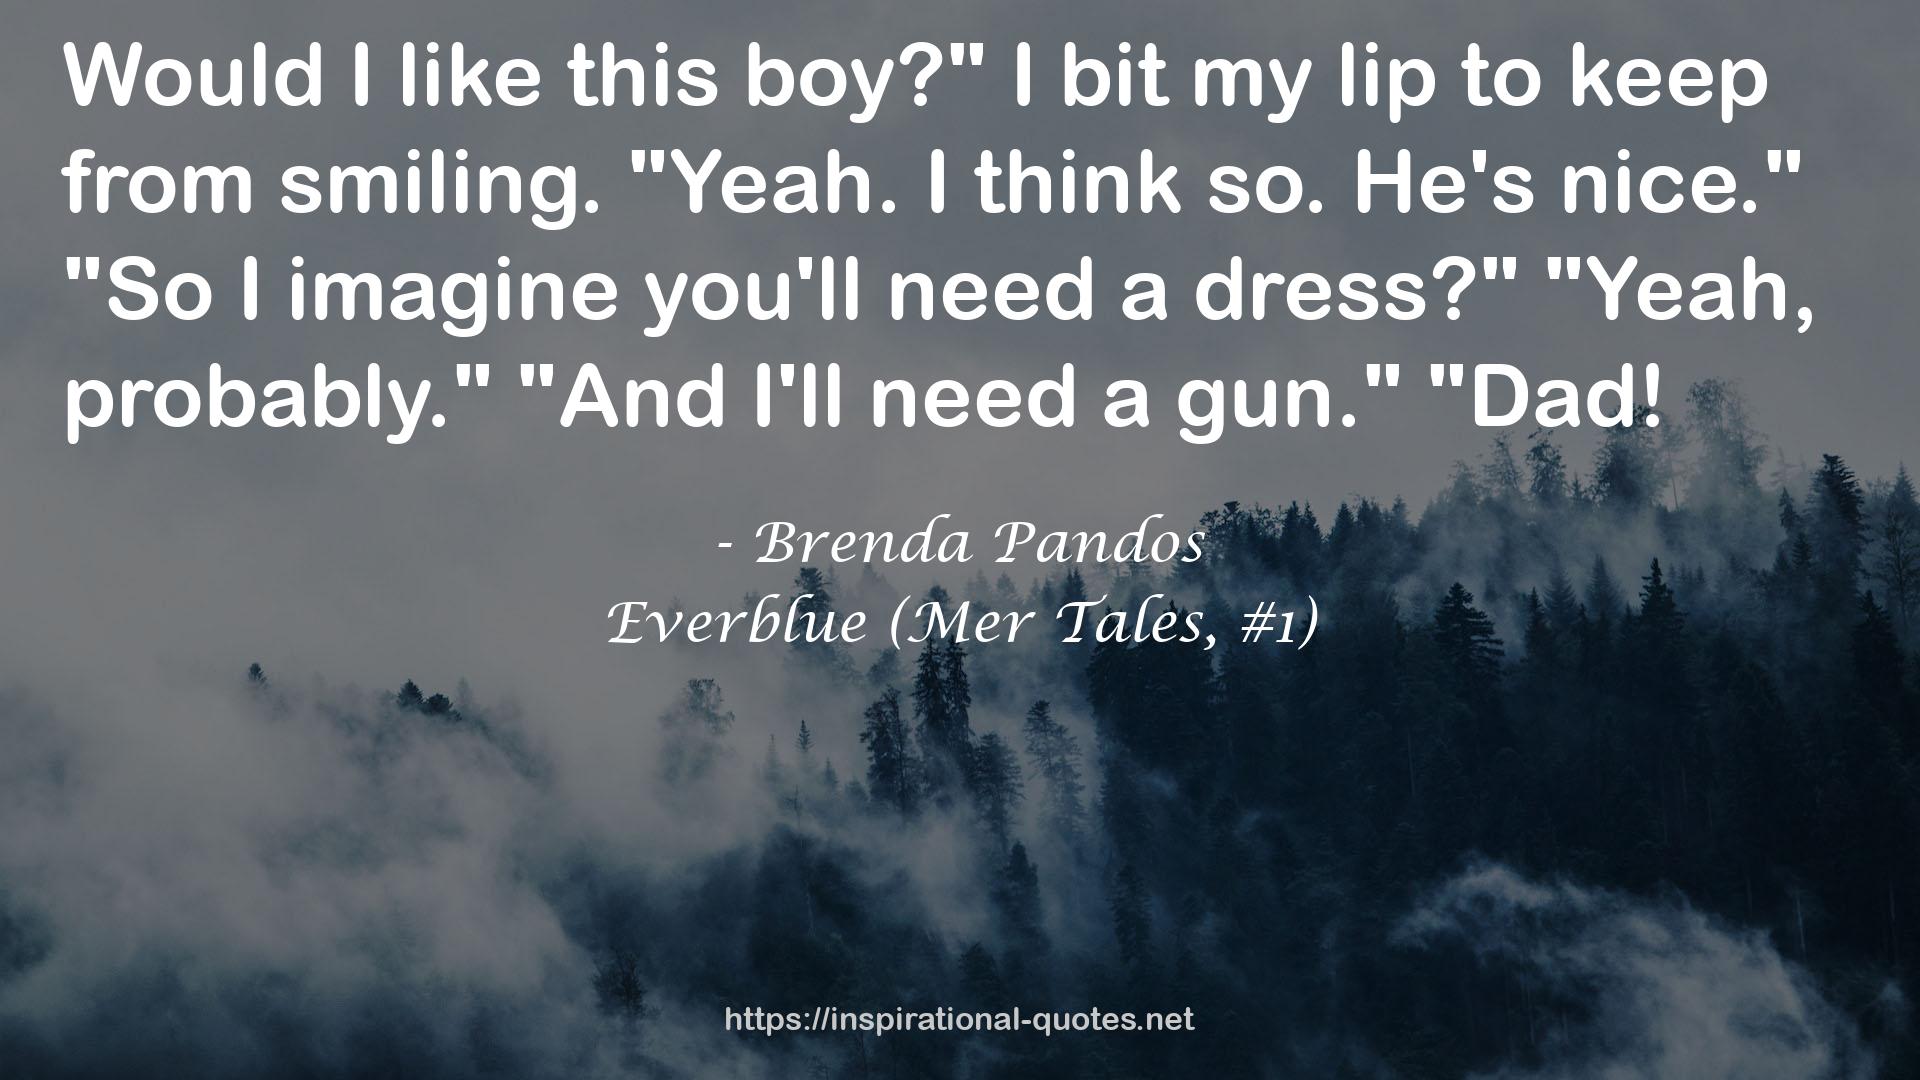 Everblue (Mer Tales, #1) QUOTES